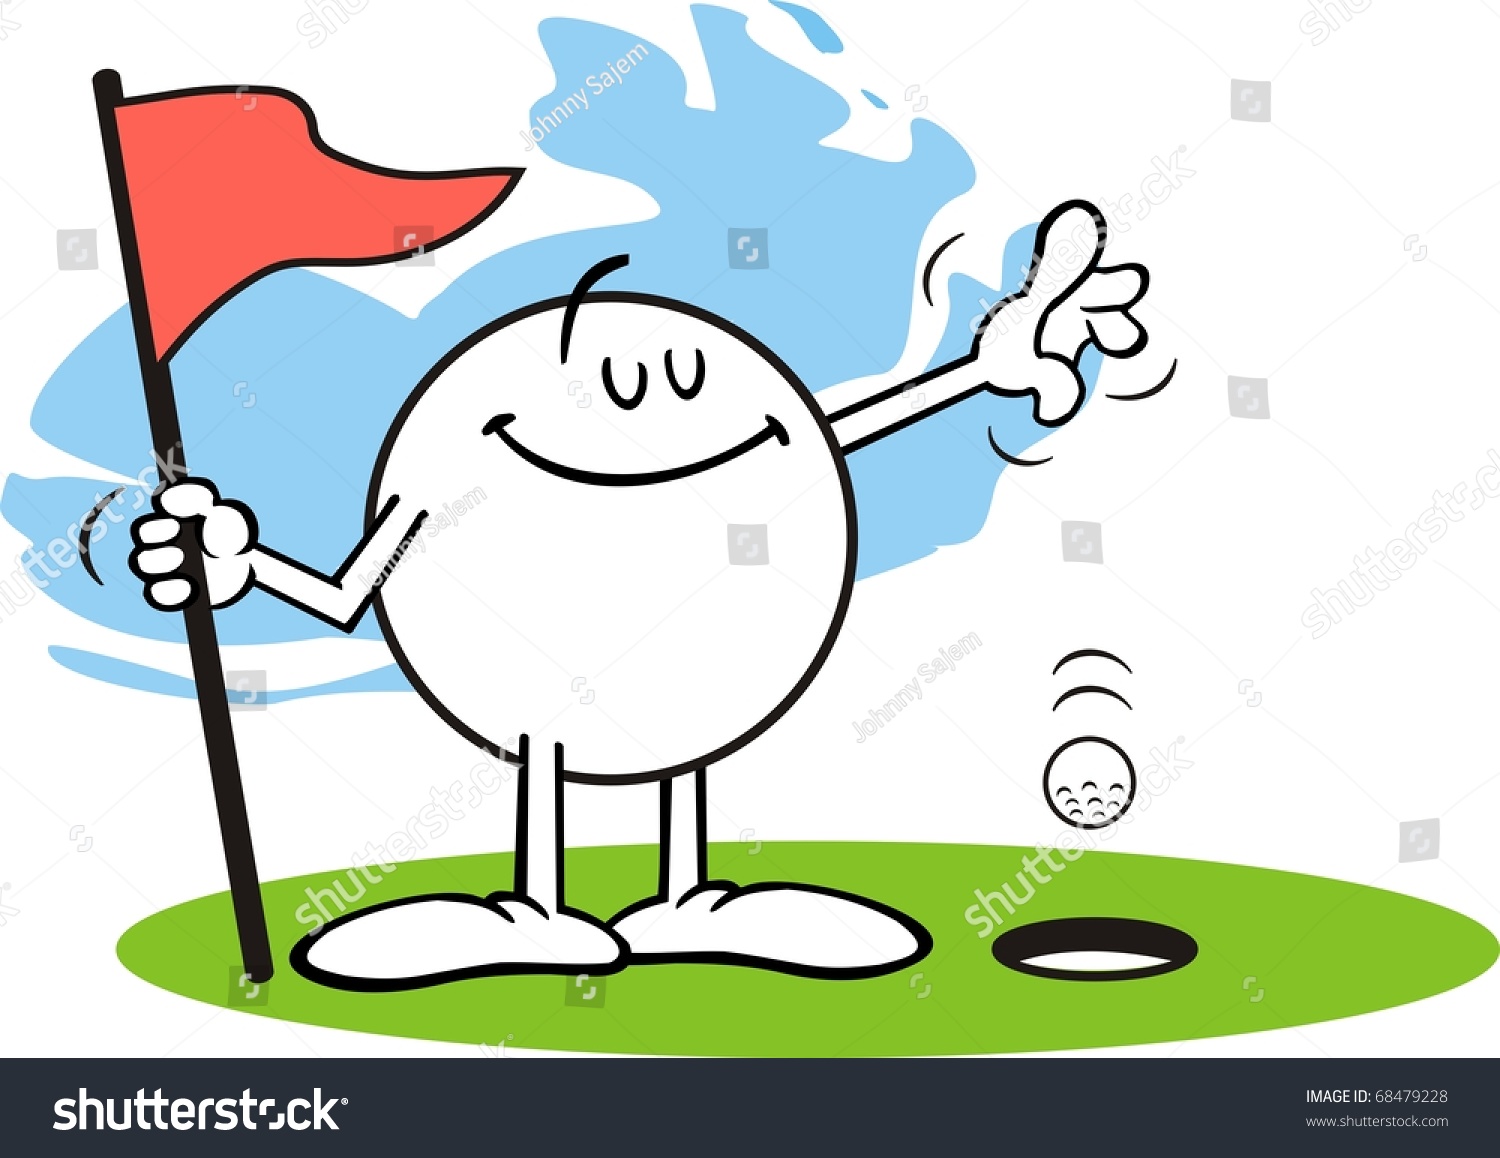 free golf hole in one clip art - photo #4